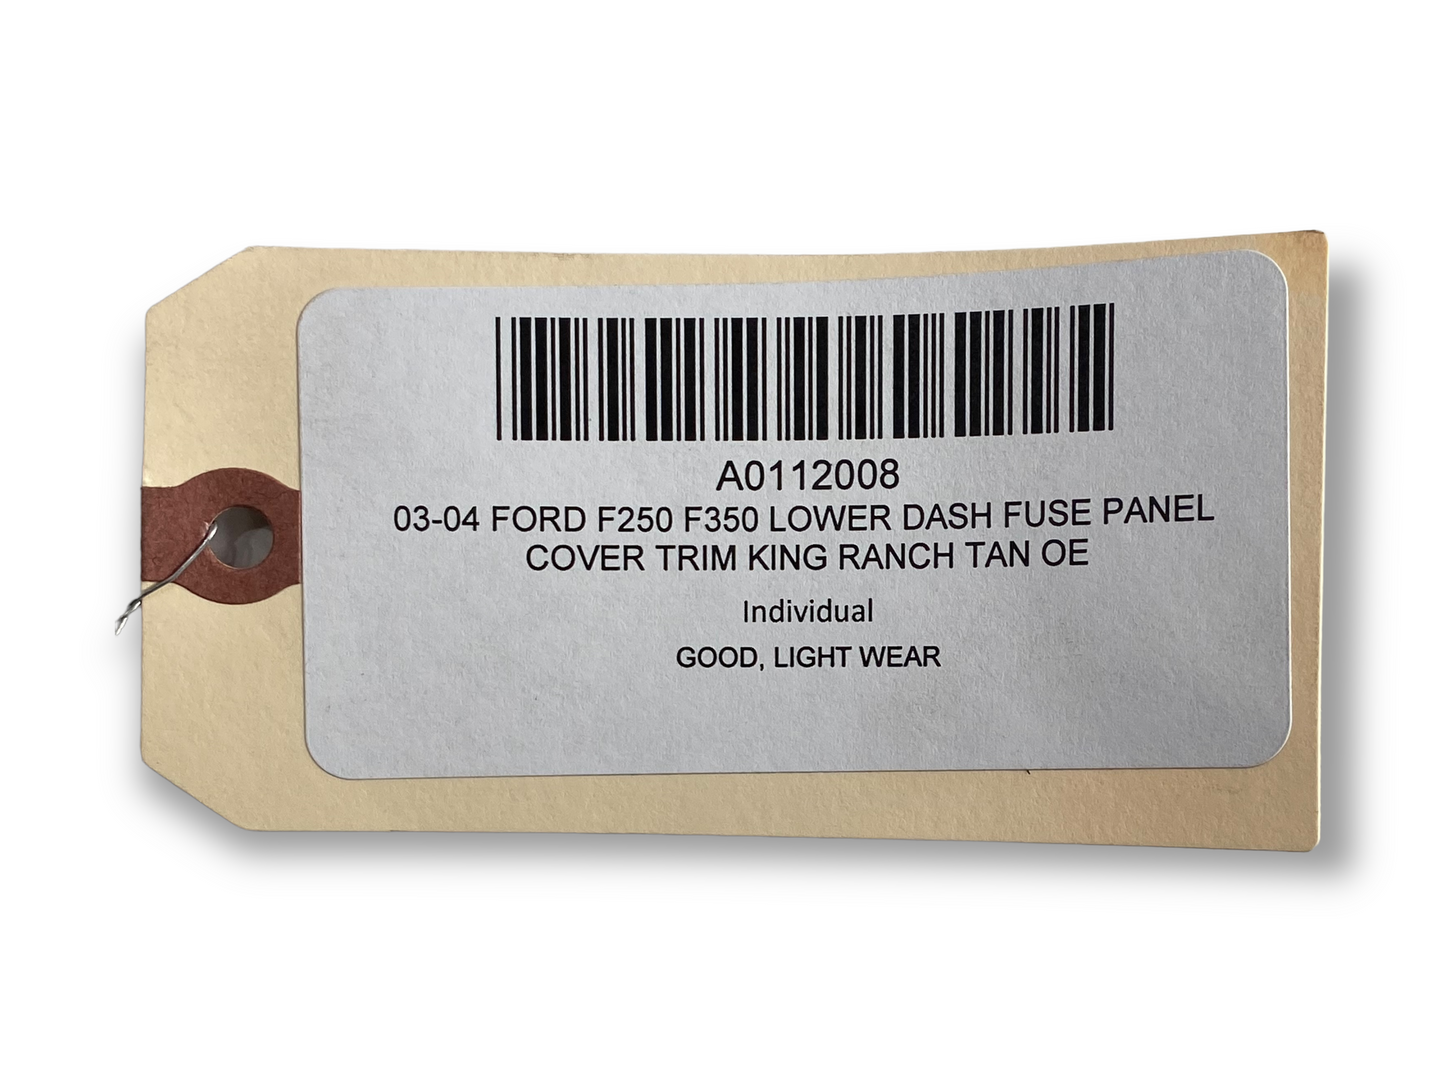 03-04 Ford F250 F350 Lower Dash Fuse Panel Cover Trim King Ranch Tan OE